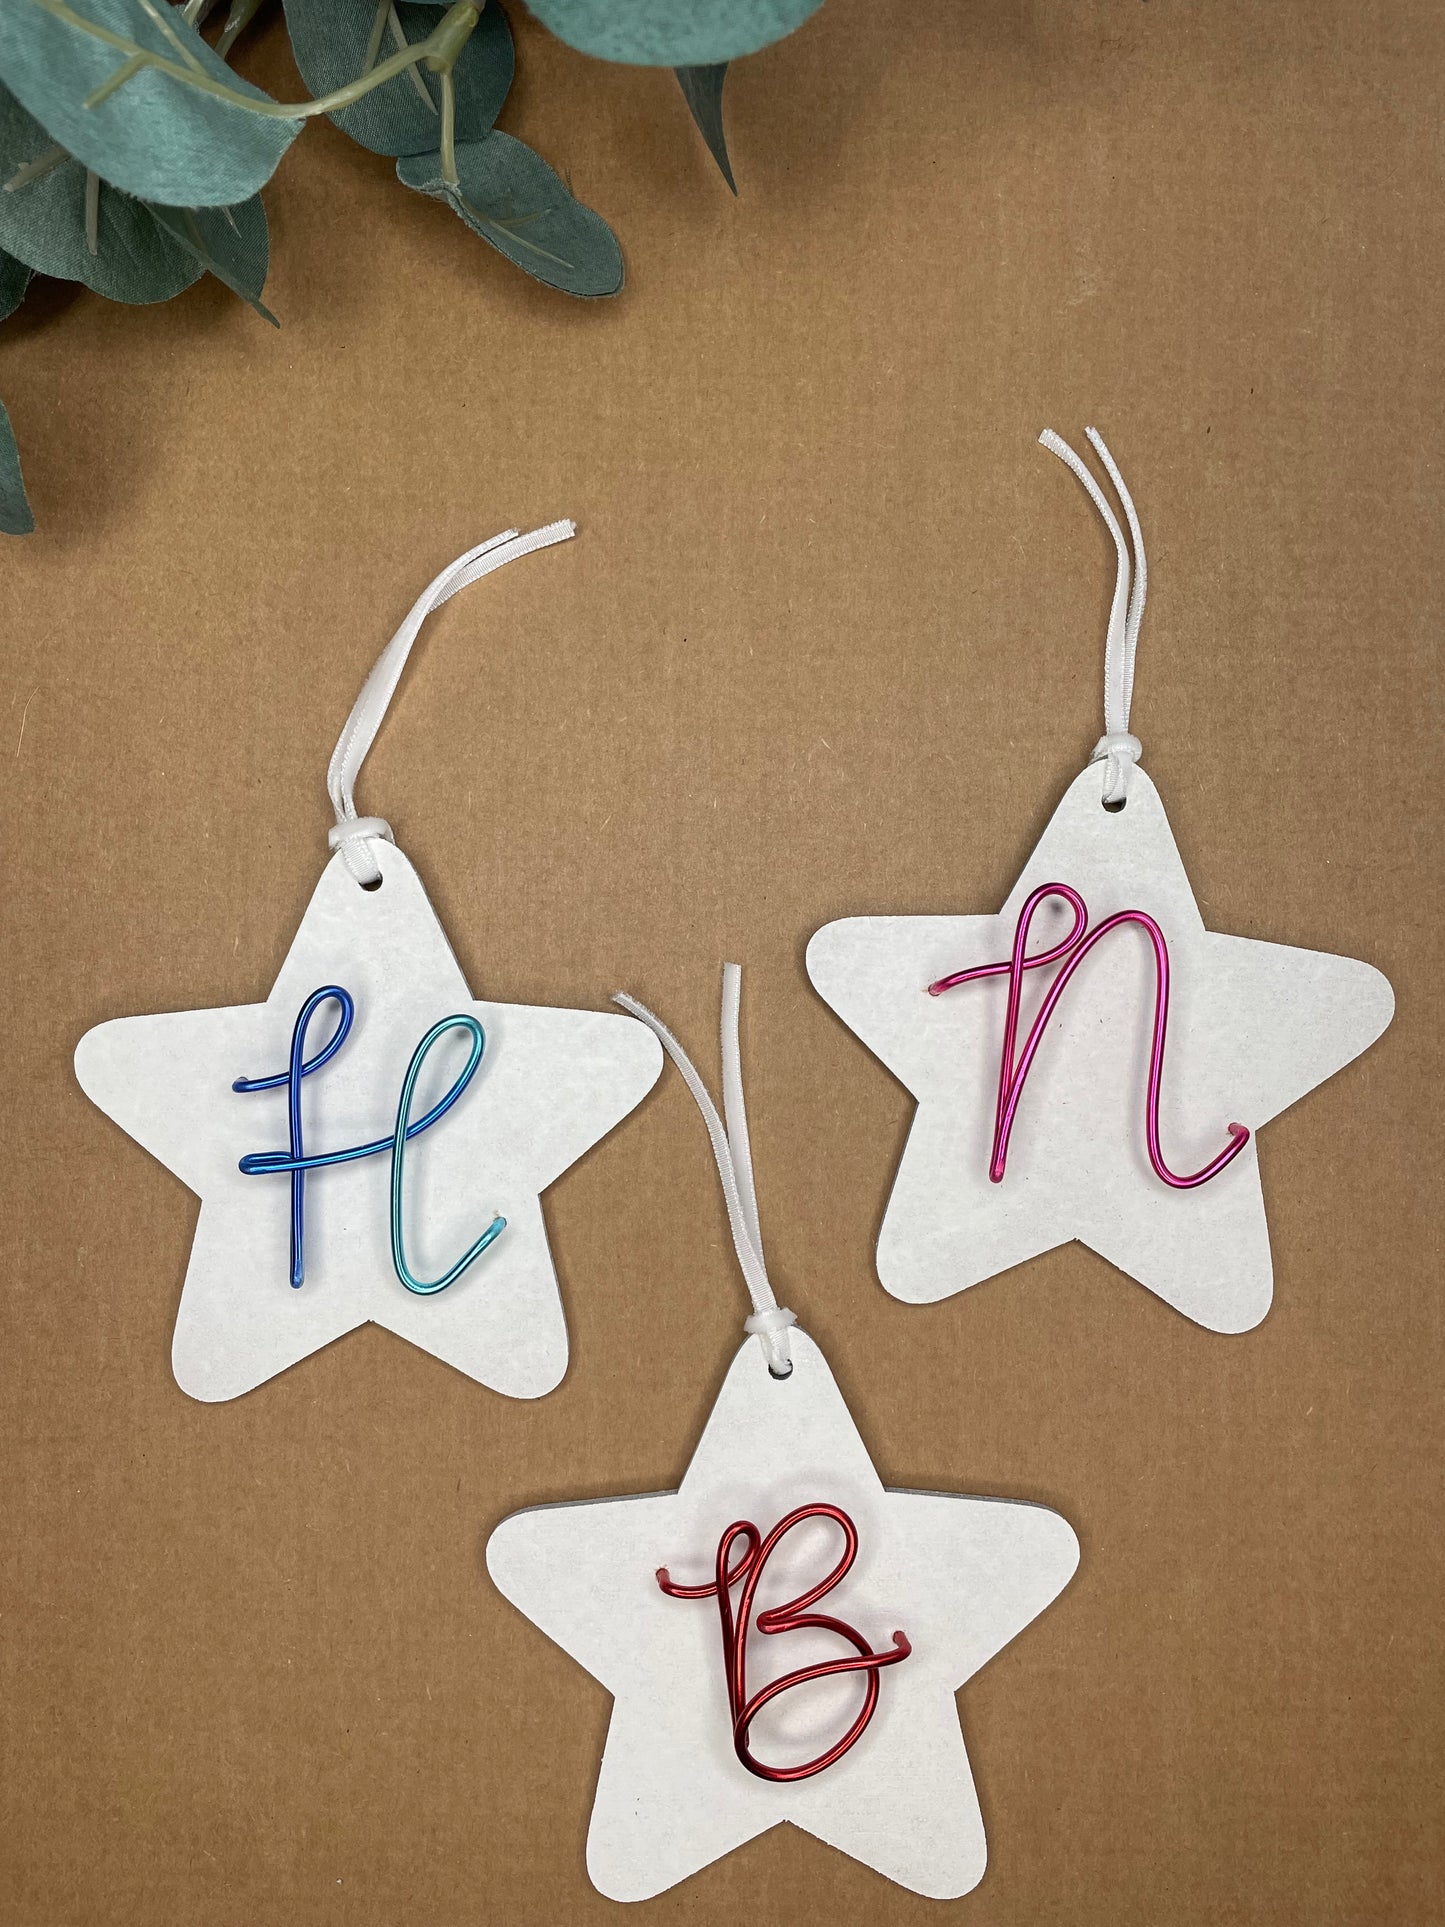 Star decoration with Initials